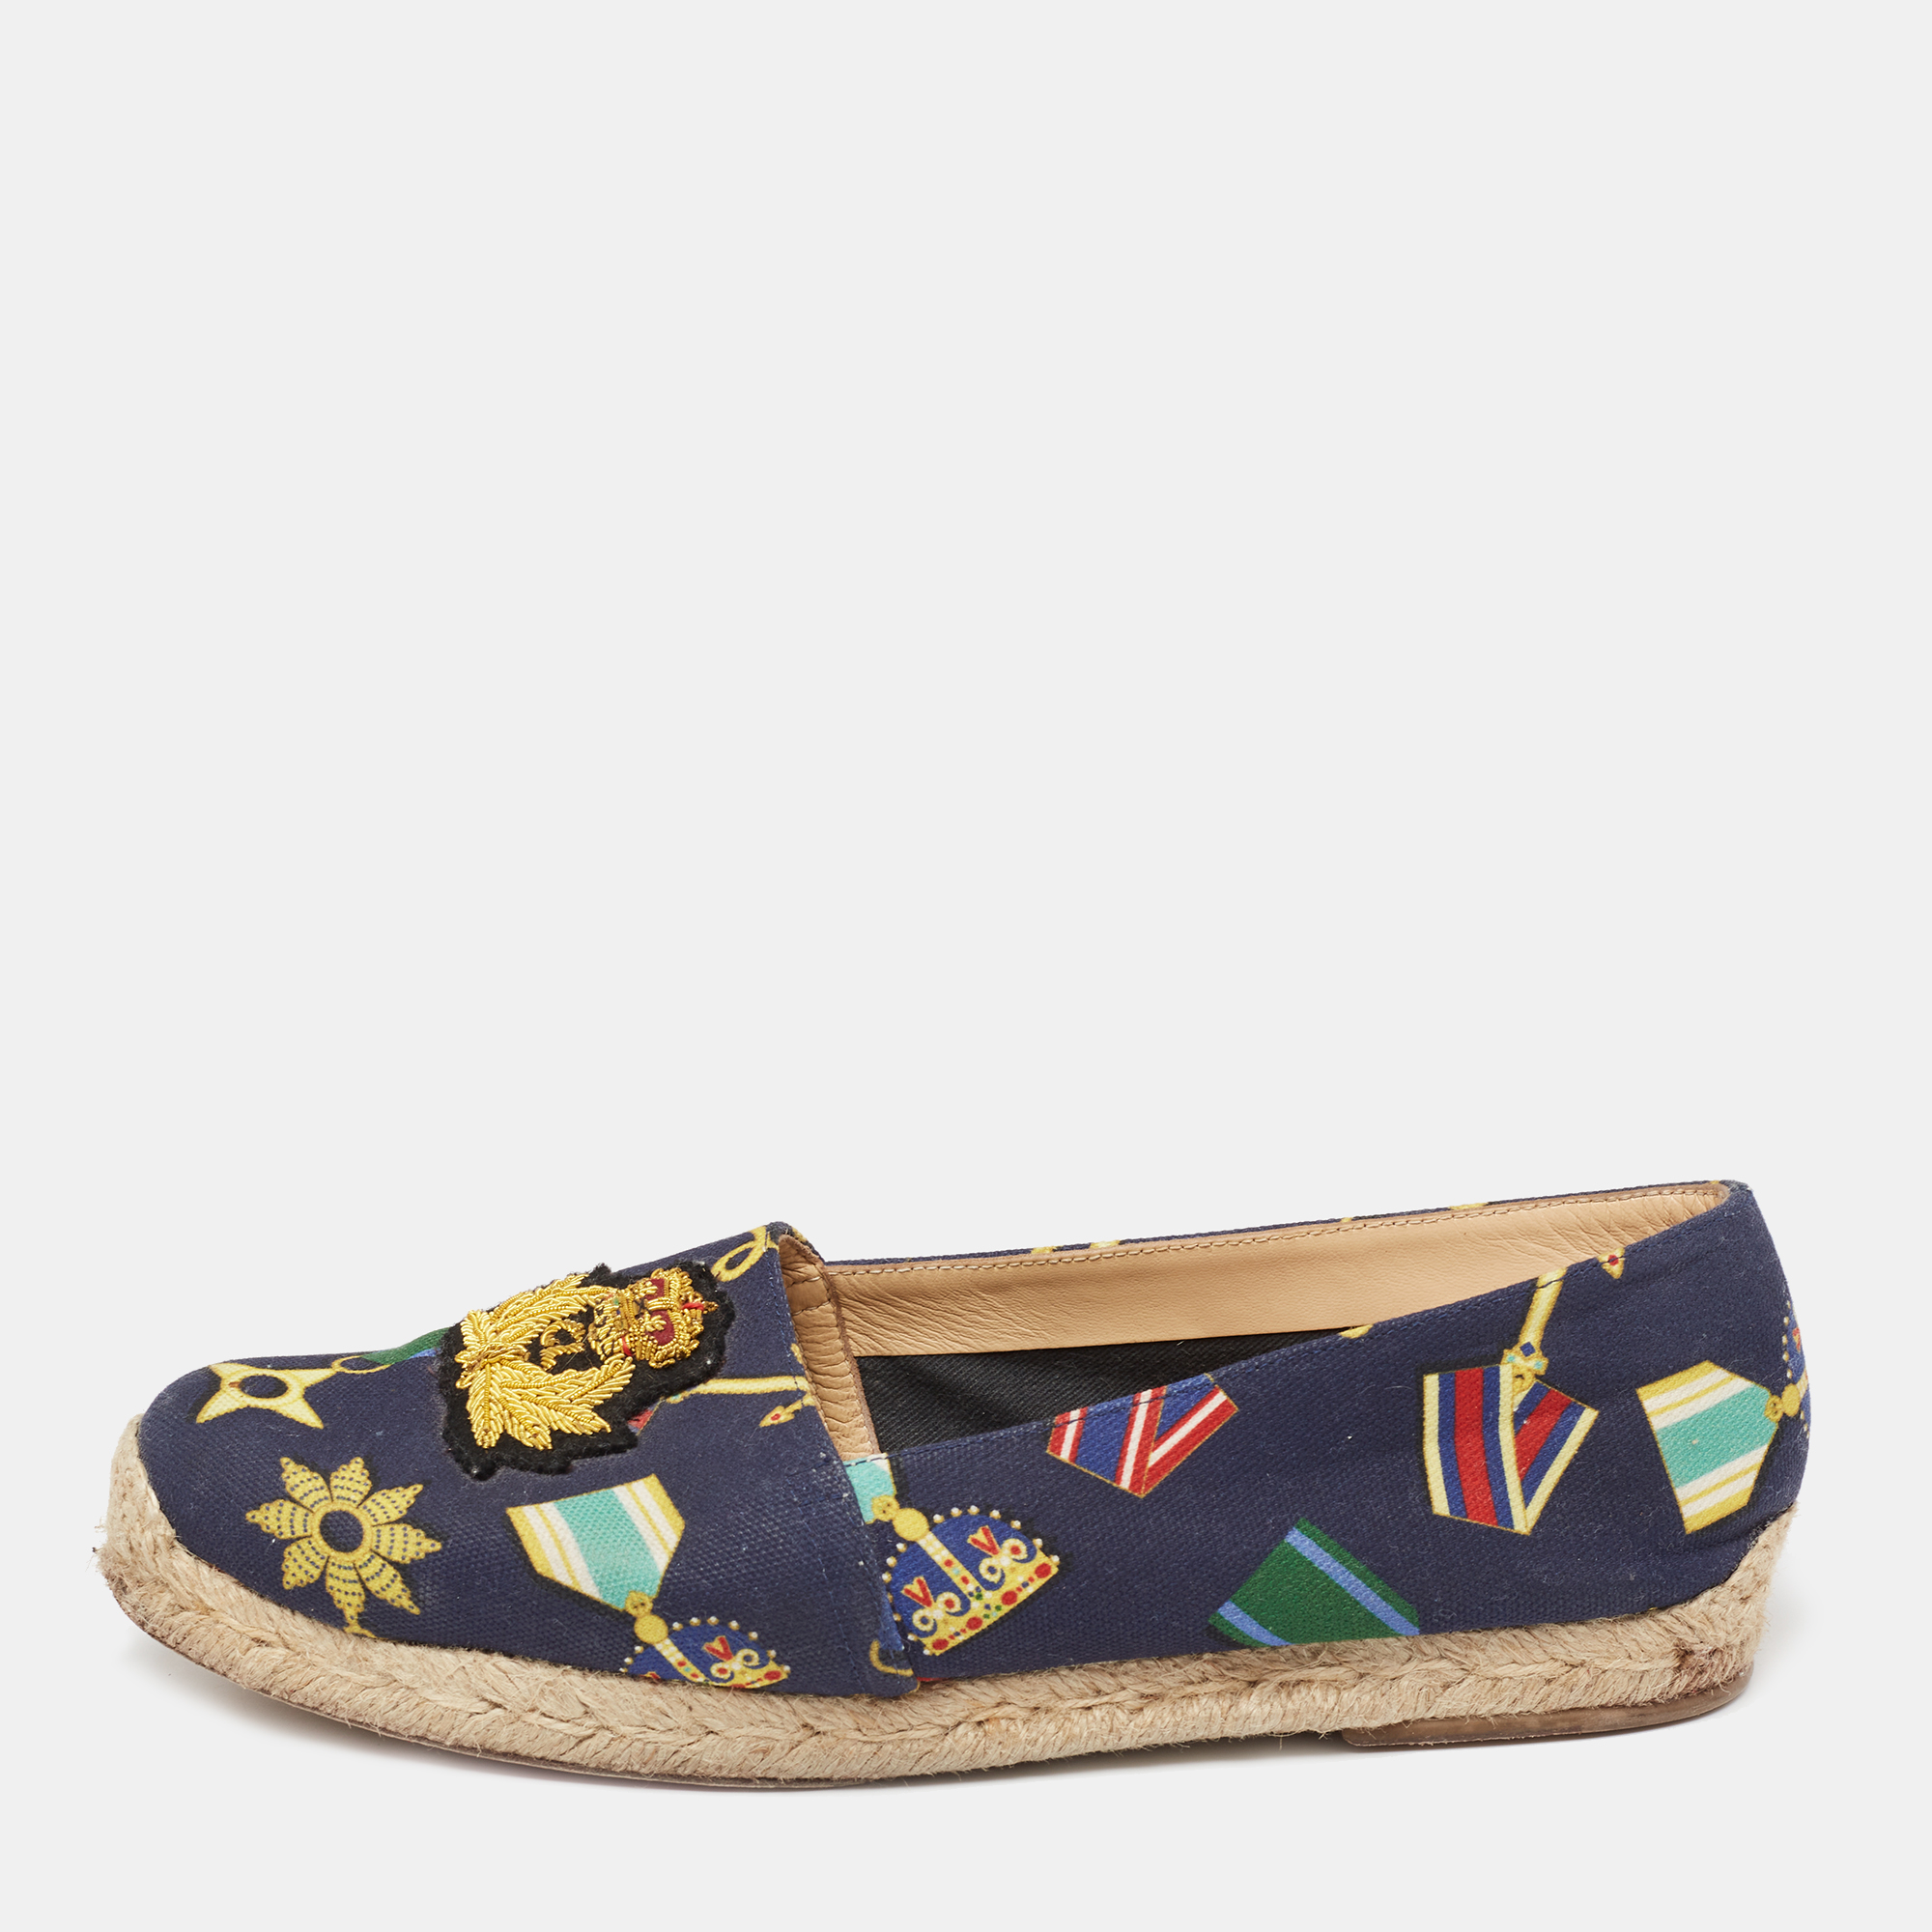 Add a dose of fun and drama to your looks with these Galia espadrille flats from the house of Christian Louboutin. It features a versatile medal printed canvas body and embroidered detailing on the vamps. Style with summer dresses or boyfriend jeans this pair is sure to make a statement